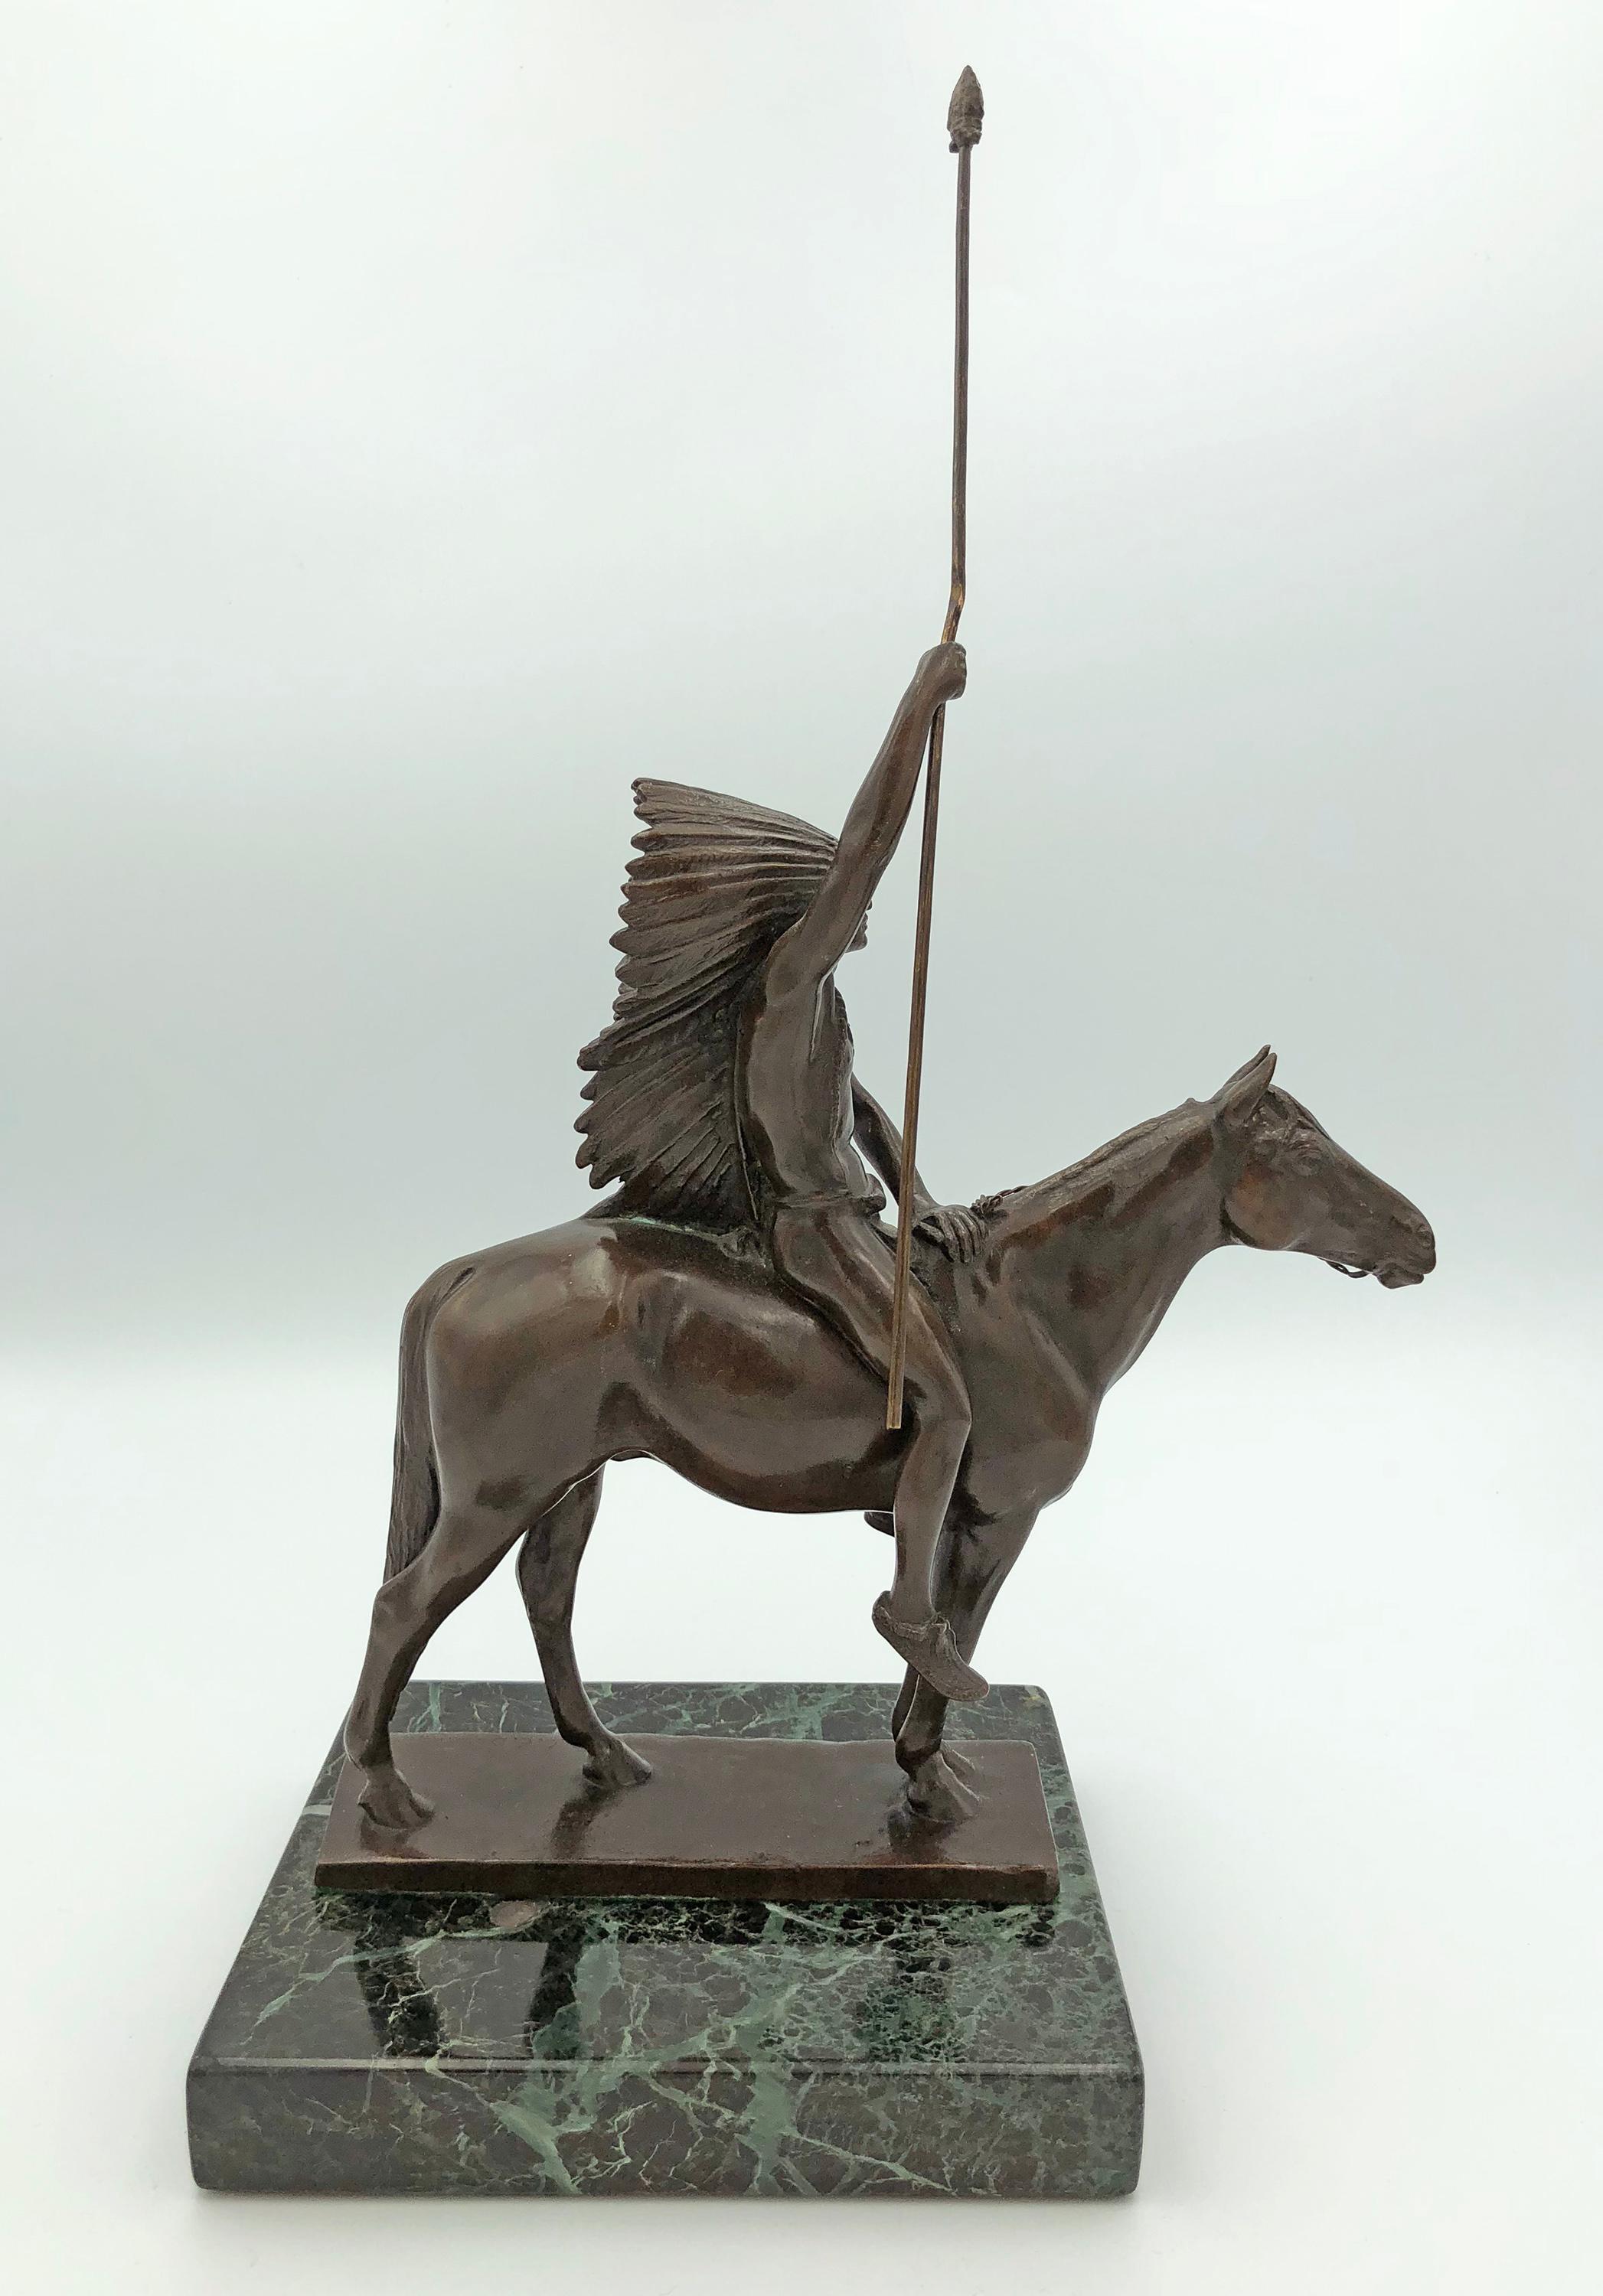 Signal of Peace - American Realist Sculpture by Cyrus Dallin